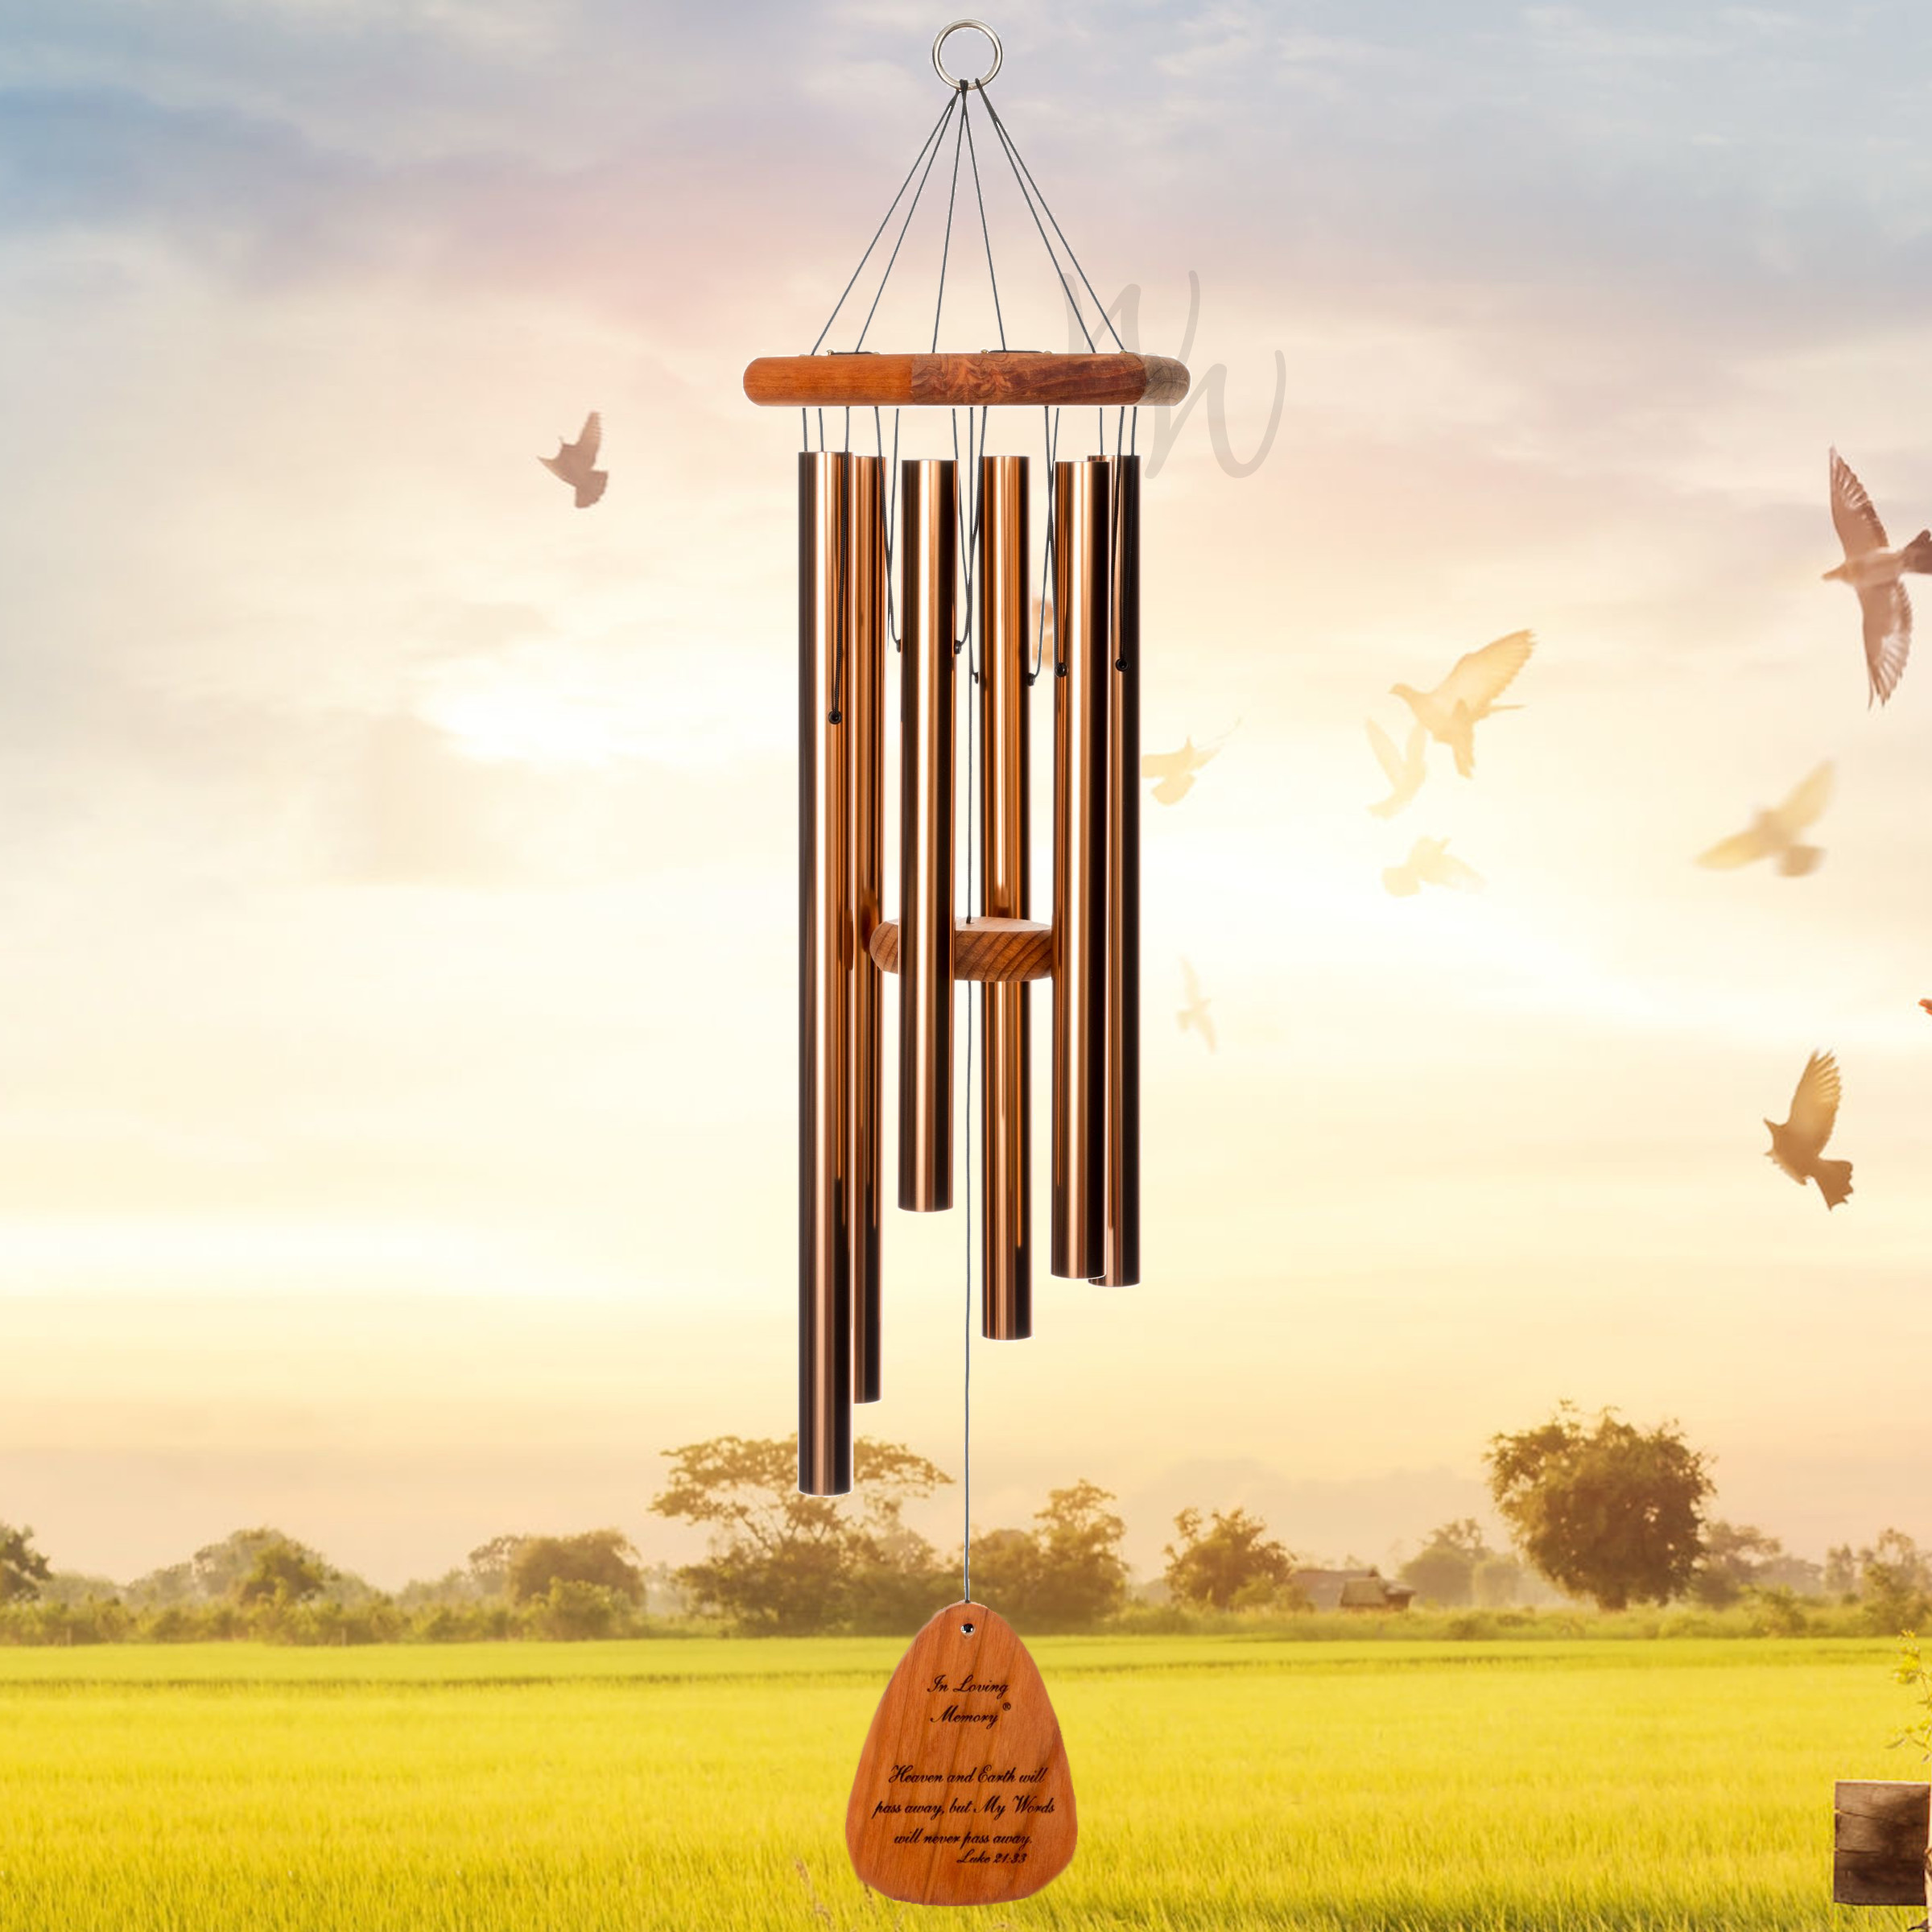 In Loving Memory 35 Inch Windchime - My Words will never pass away... in Bronze